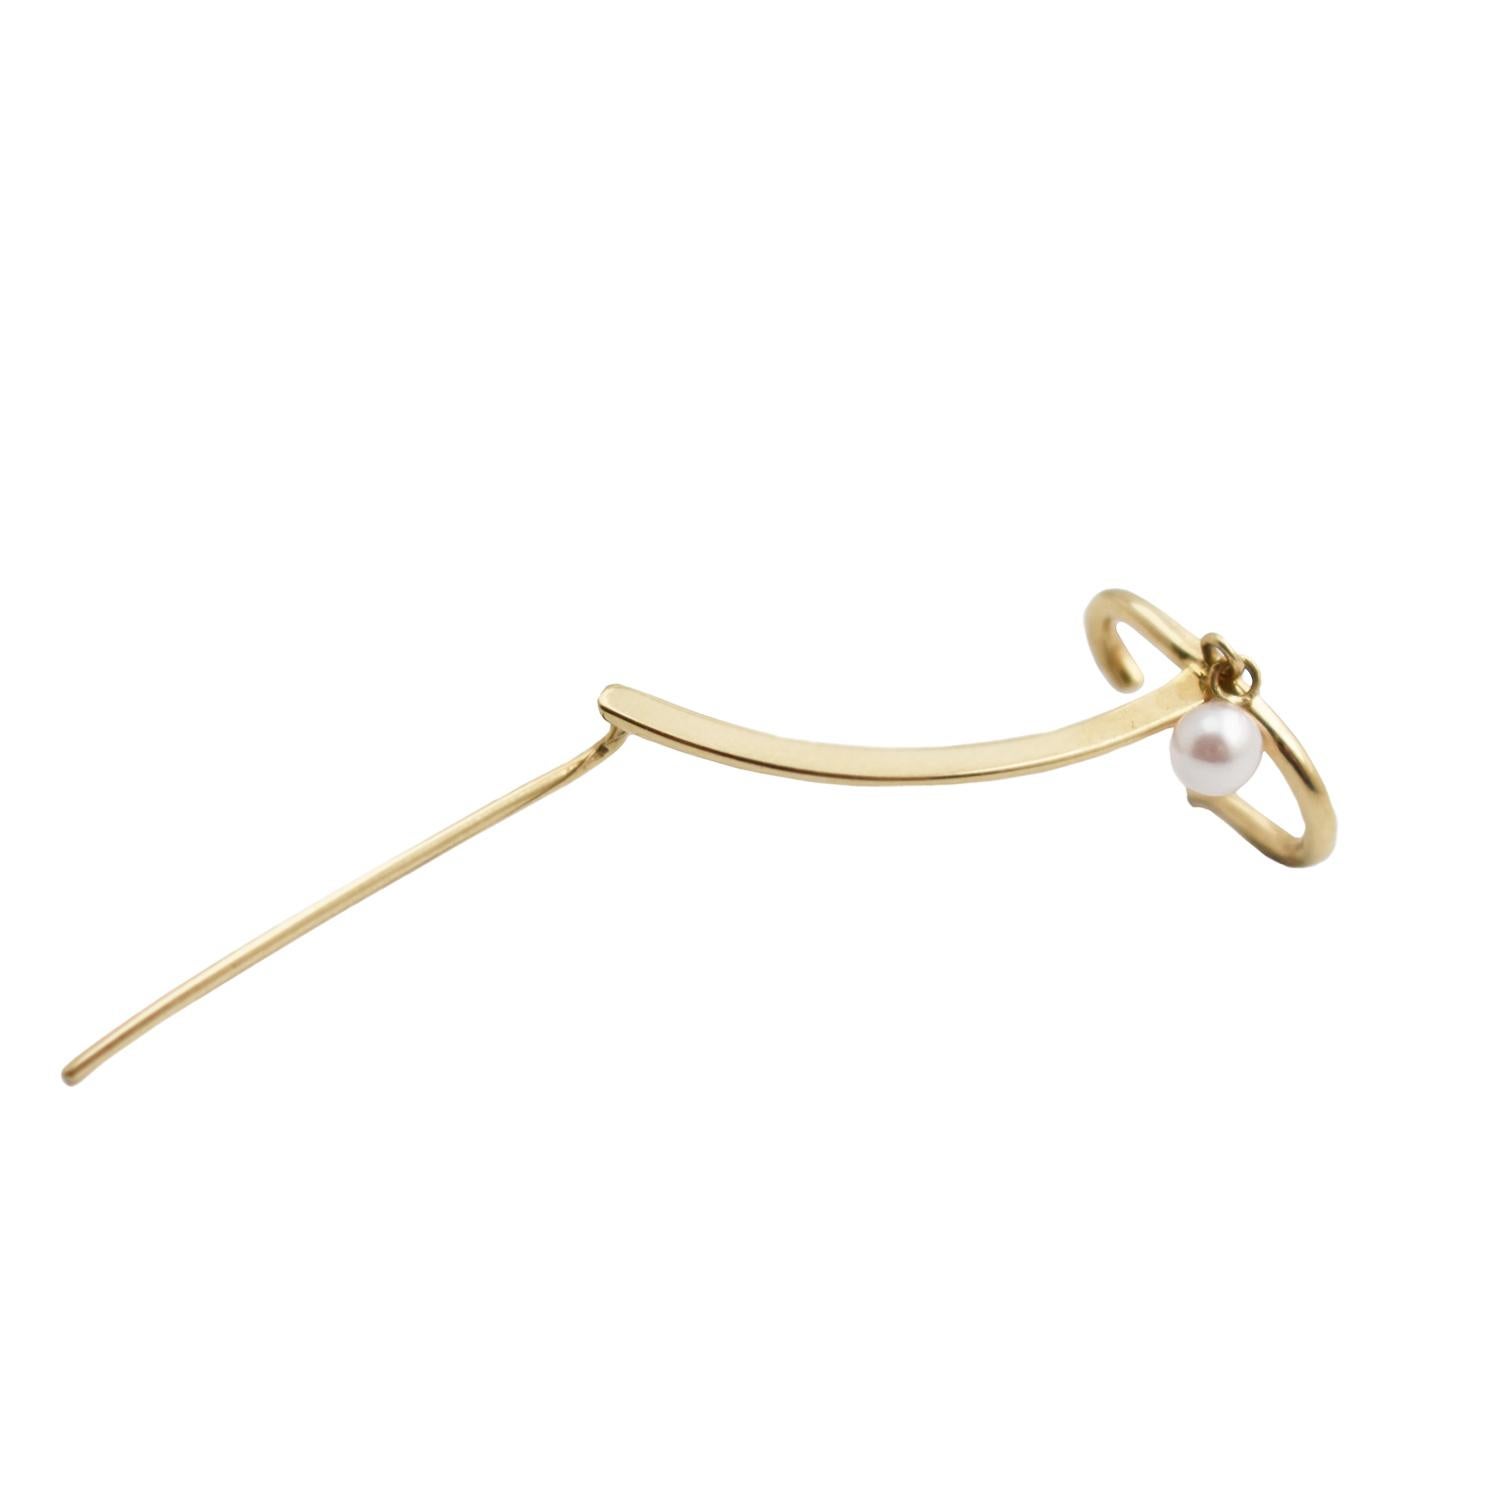 The Margie Pearl Cuff Needle Gold Earring is a statement earring in solid 14k gold featuring a pearl dangle. Its subtle design follows the outline of the ear finishing in a comfortable cuff. 

How to wear it: 

Thread the needle end of the earring